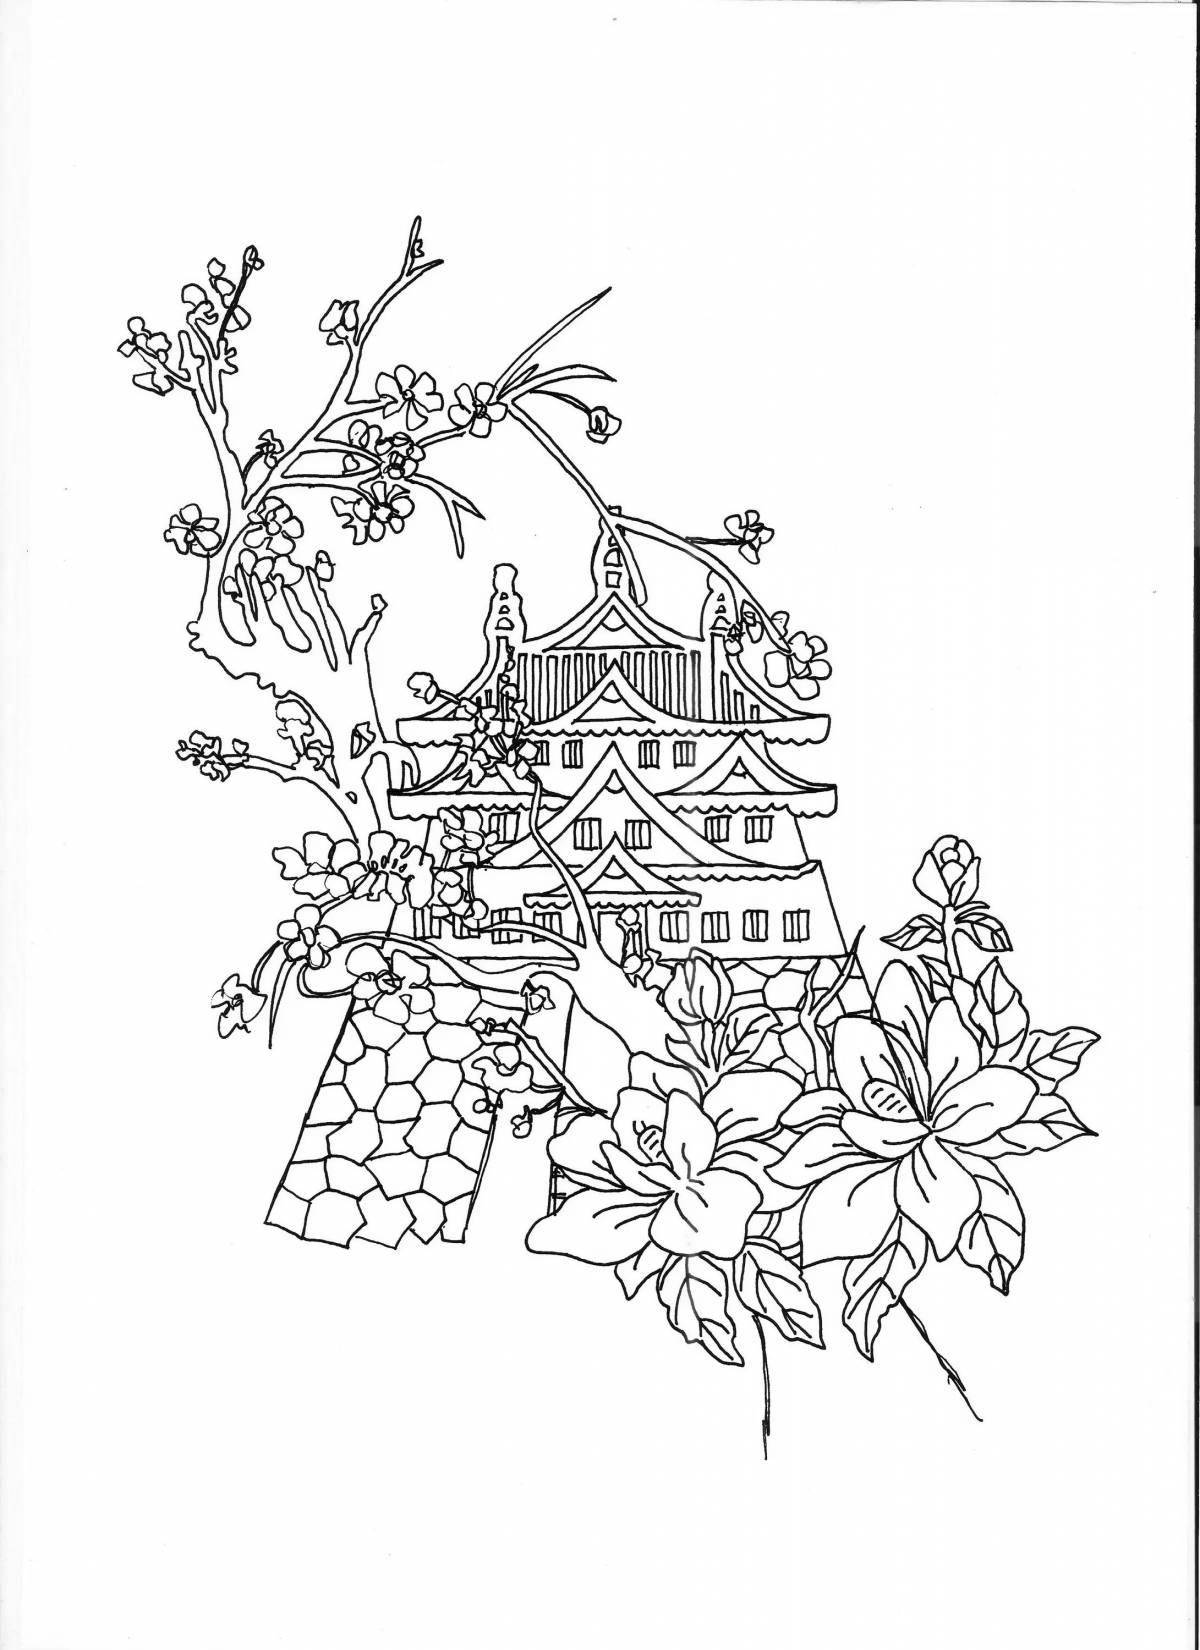 Coloring book with beautiful Japanese motif